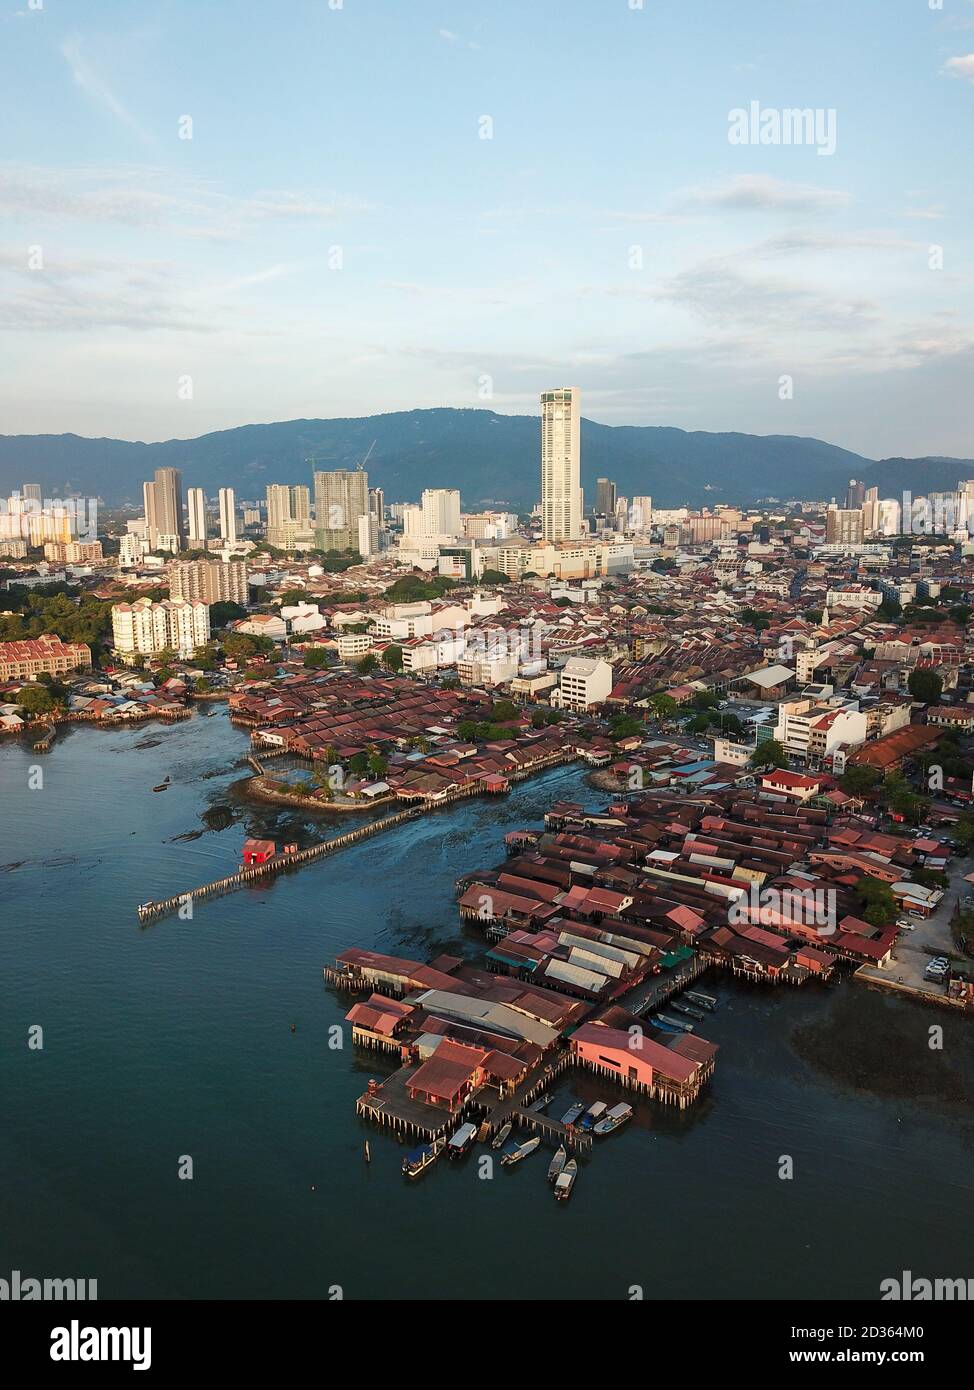 Georgetown, Penang/Malaysia - Feb 28 2020: Aerial Clan Jetty wooden house with background KOMTAR building. Stock Photo